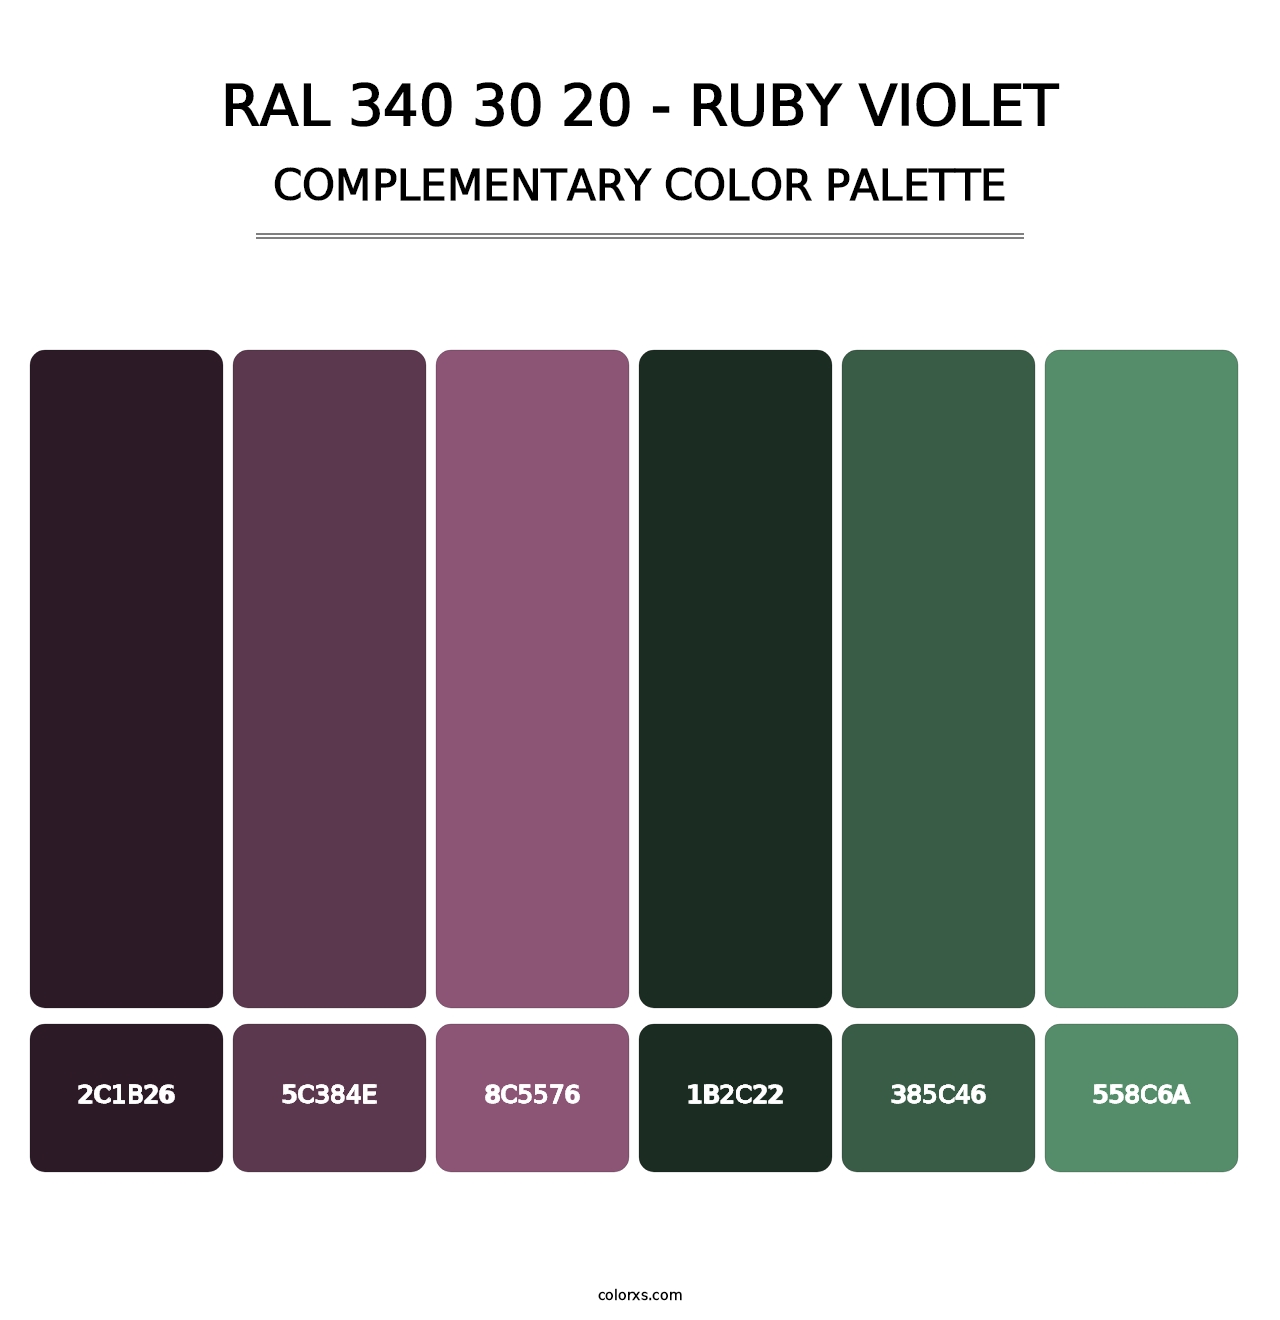 RAL 340 30 20 - Ruby Violet - Complementary Color Palette